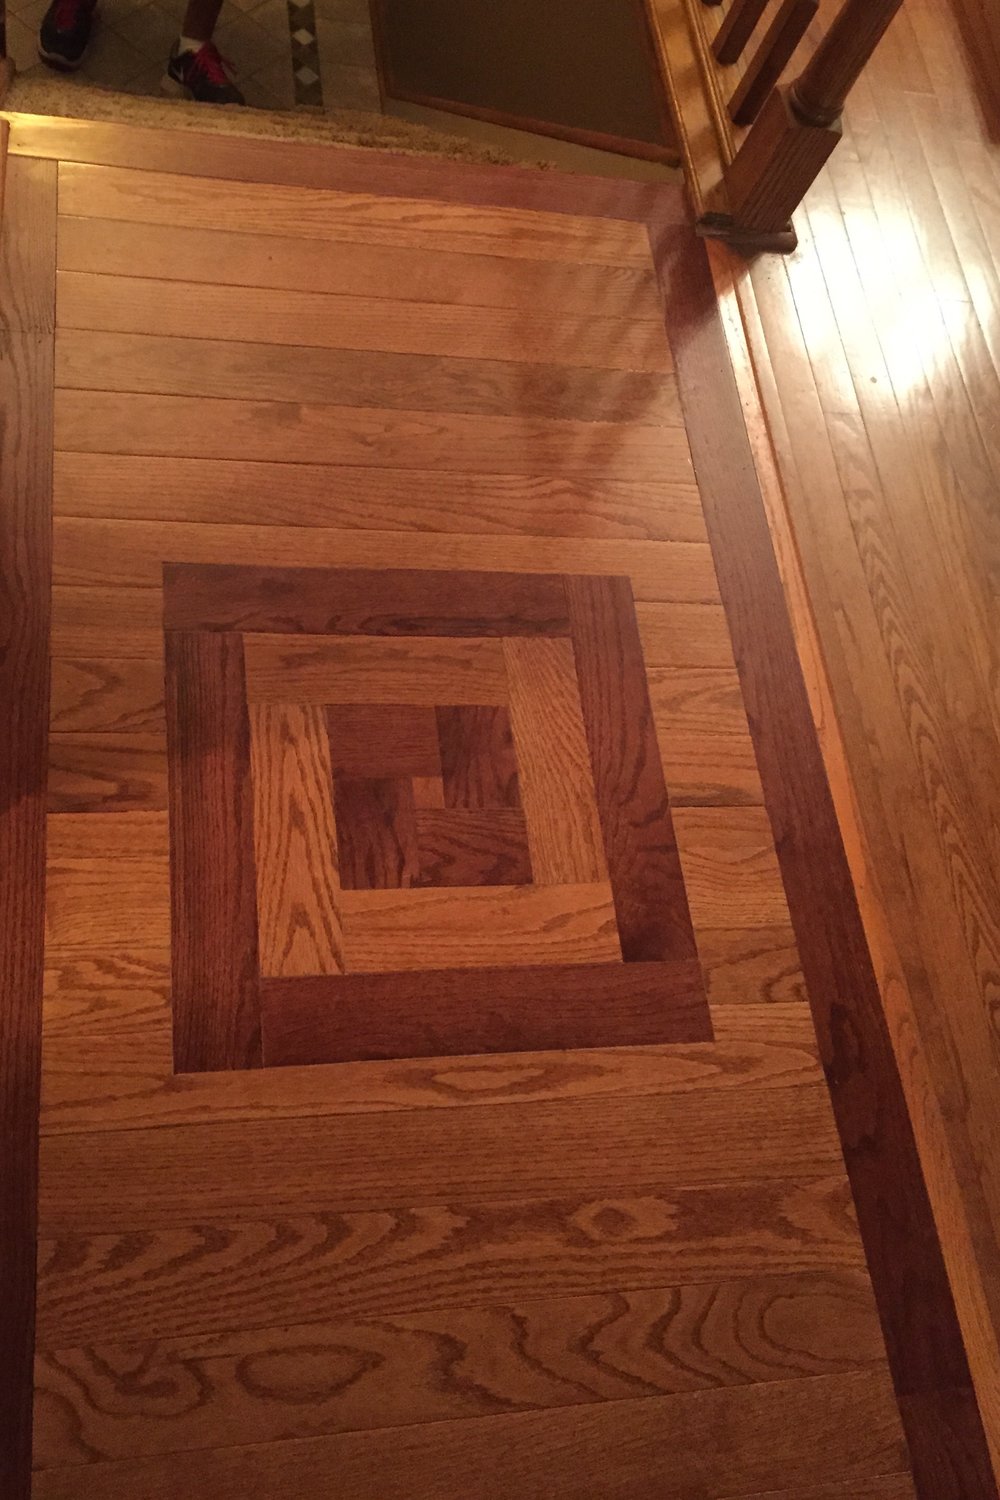 About Transition Flooring Concepts, Transition From Tile To Hardwood Floor